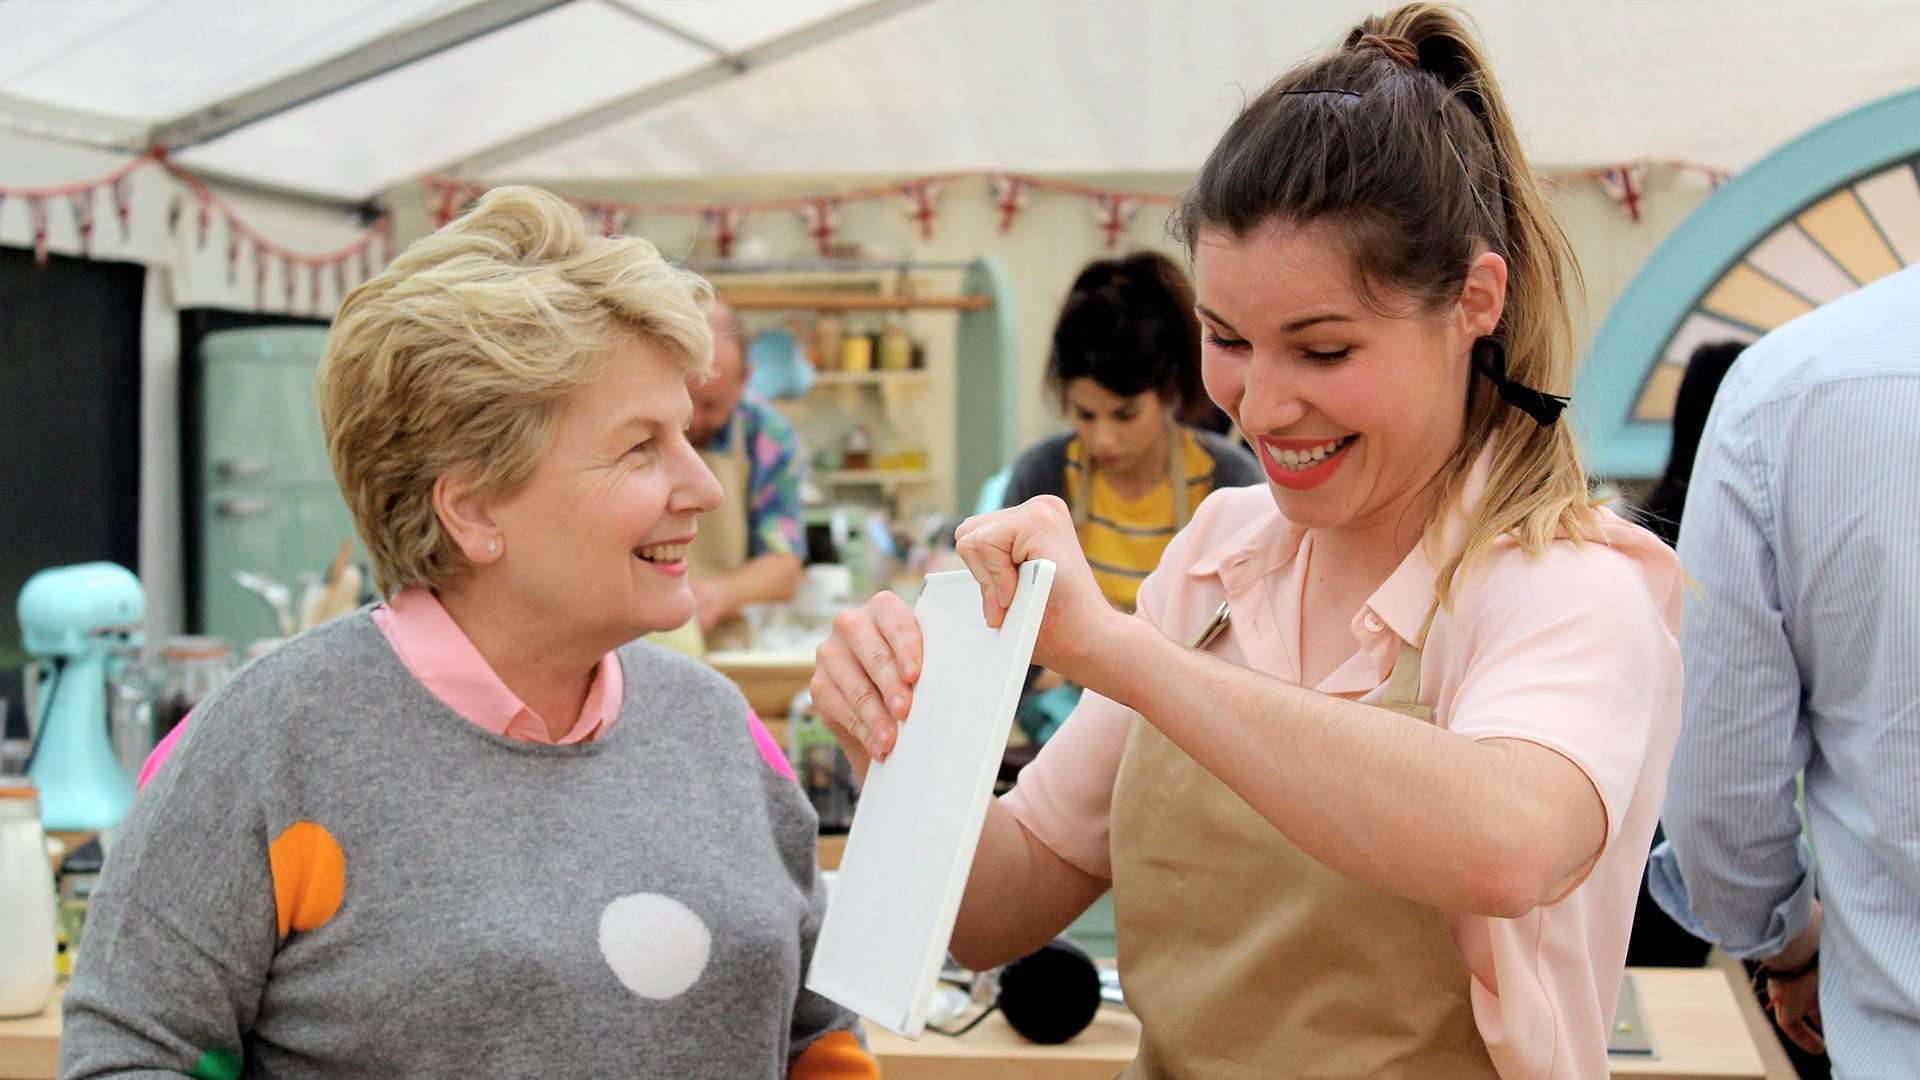 How to watch The Great British Bake Off outside UK